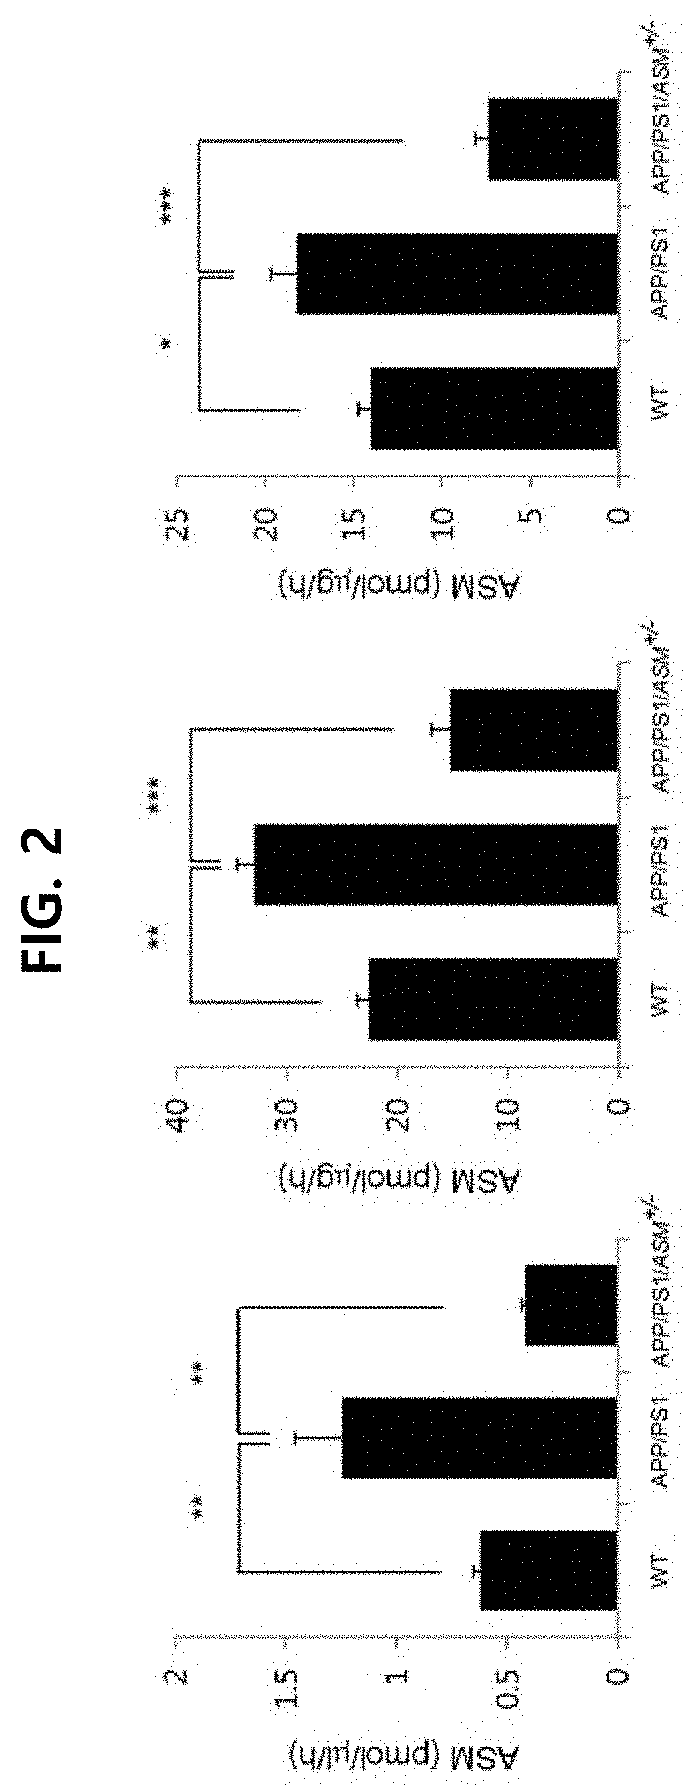 Method for treating a degenerative neurological disorders comprising administering asm inhibitor